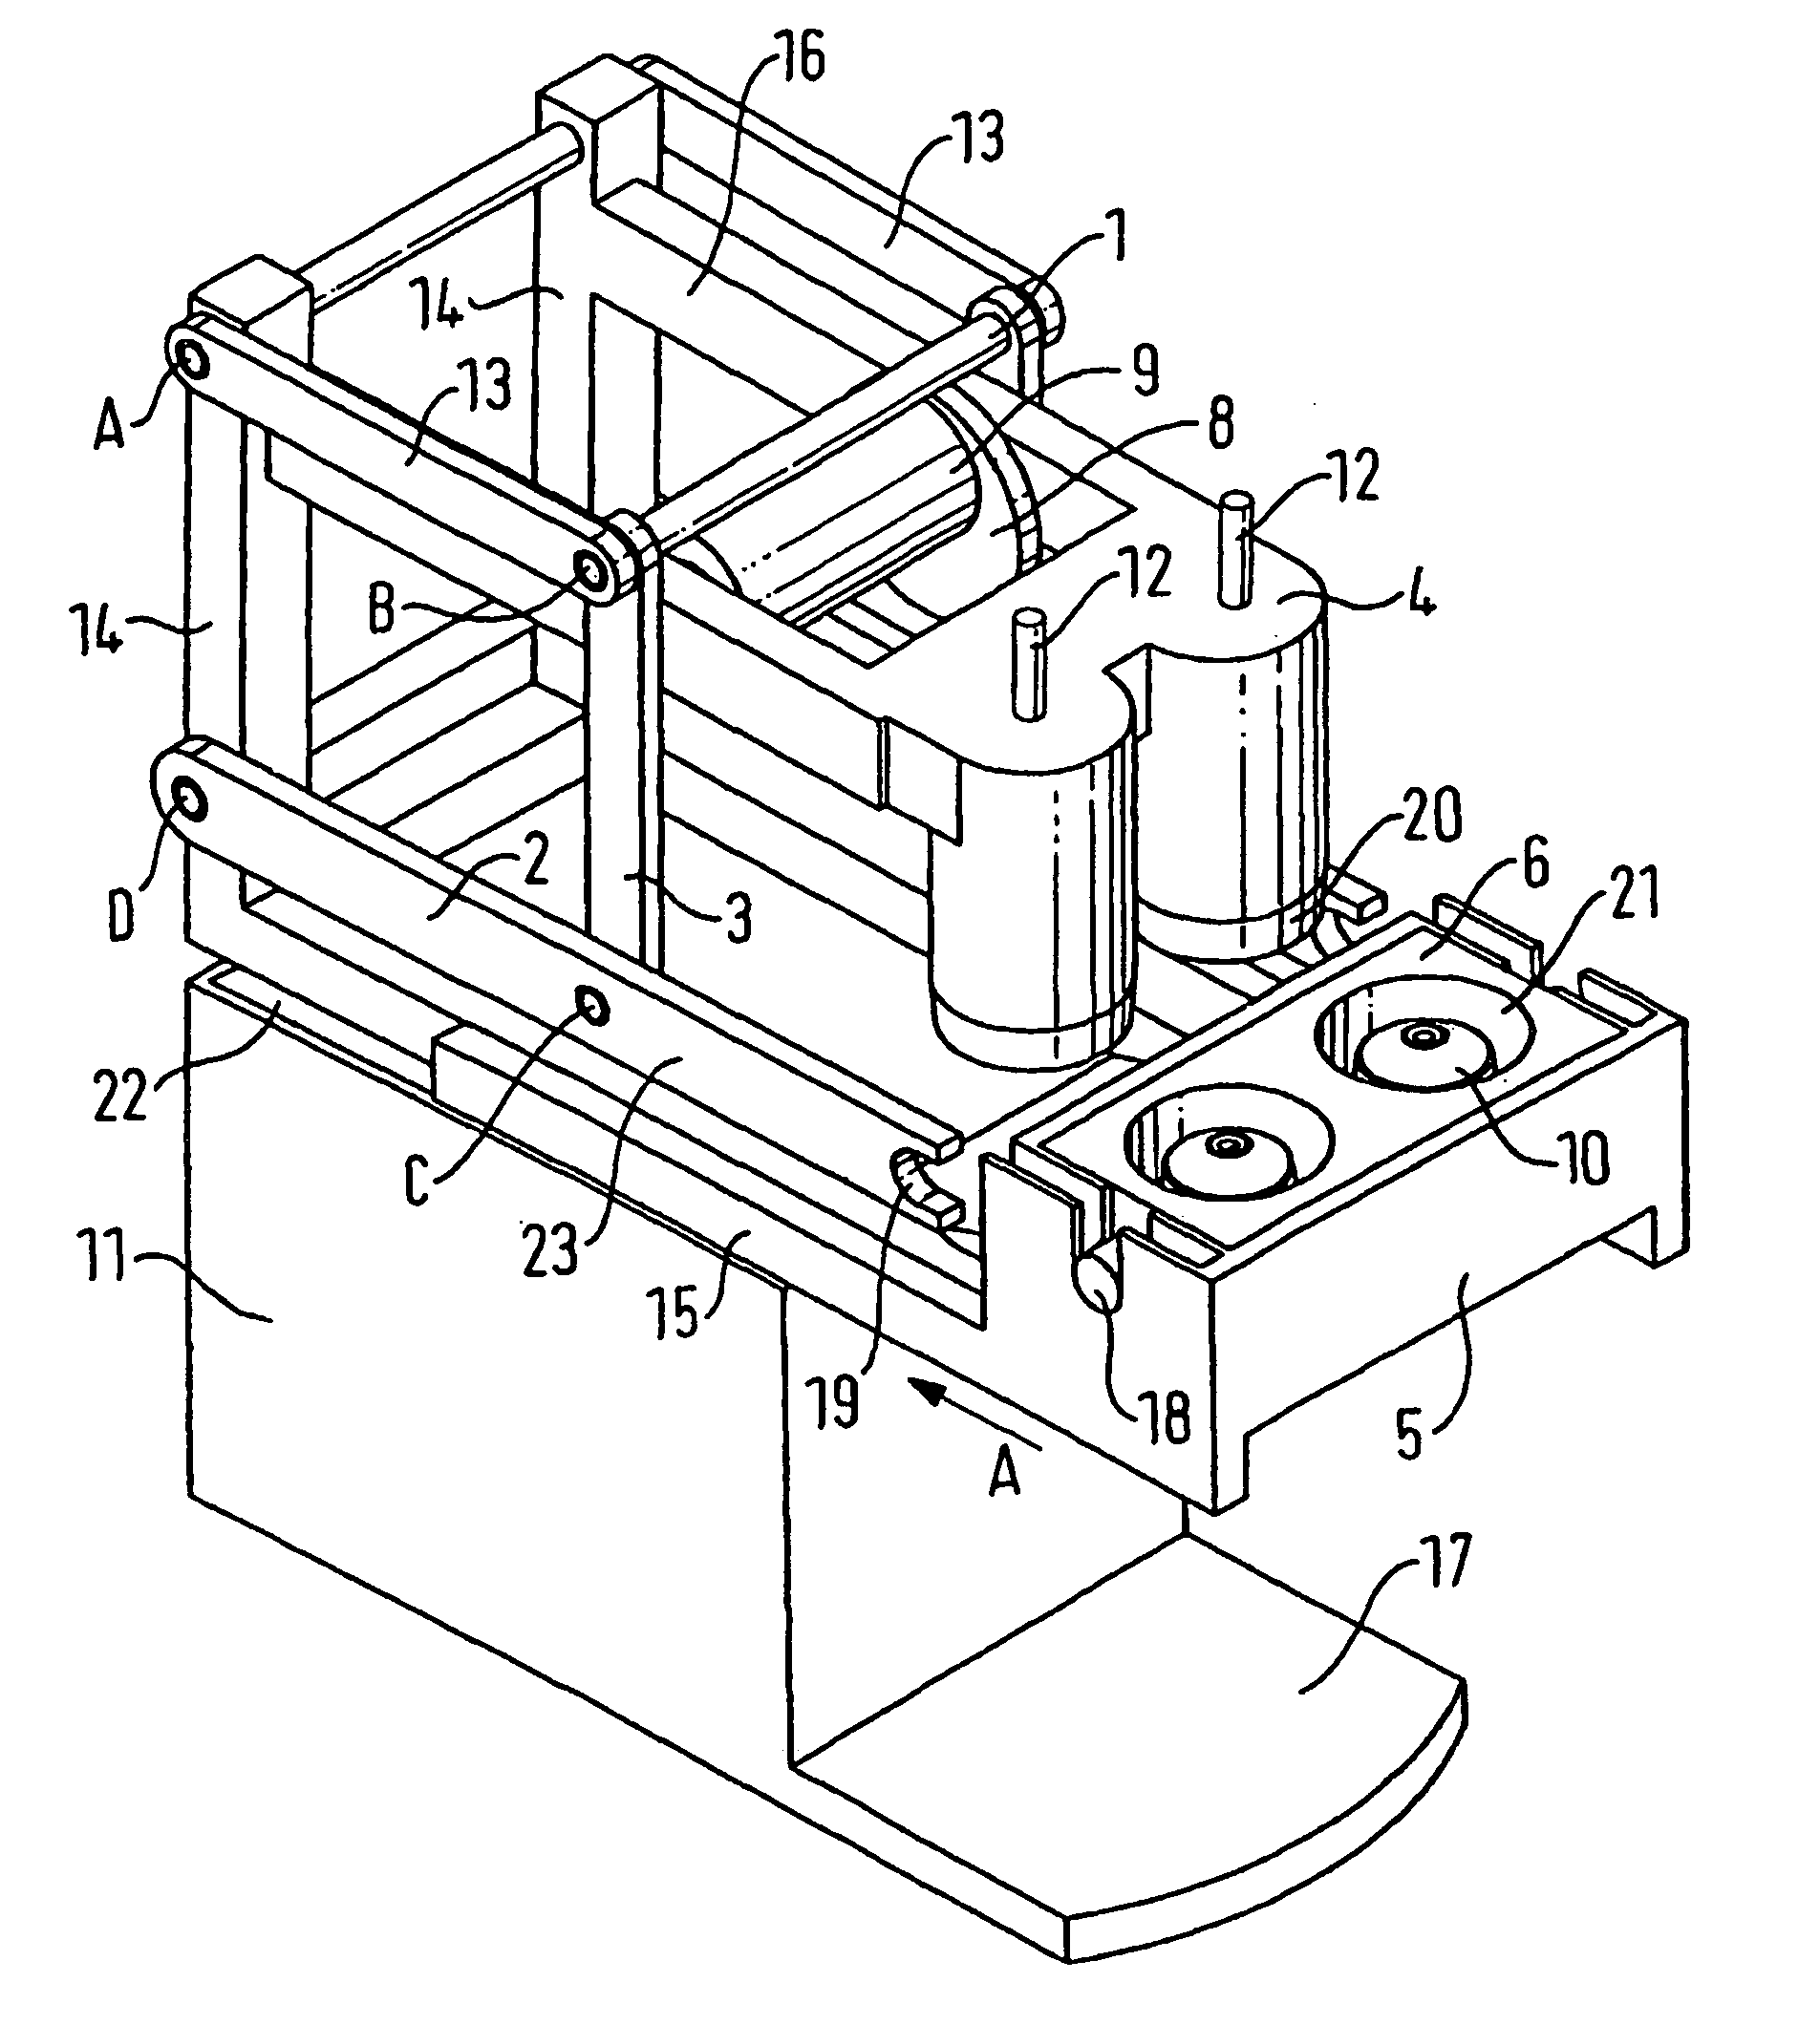 Automatic device for the extraction of a substance